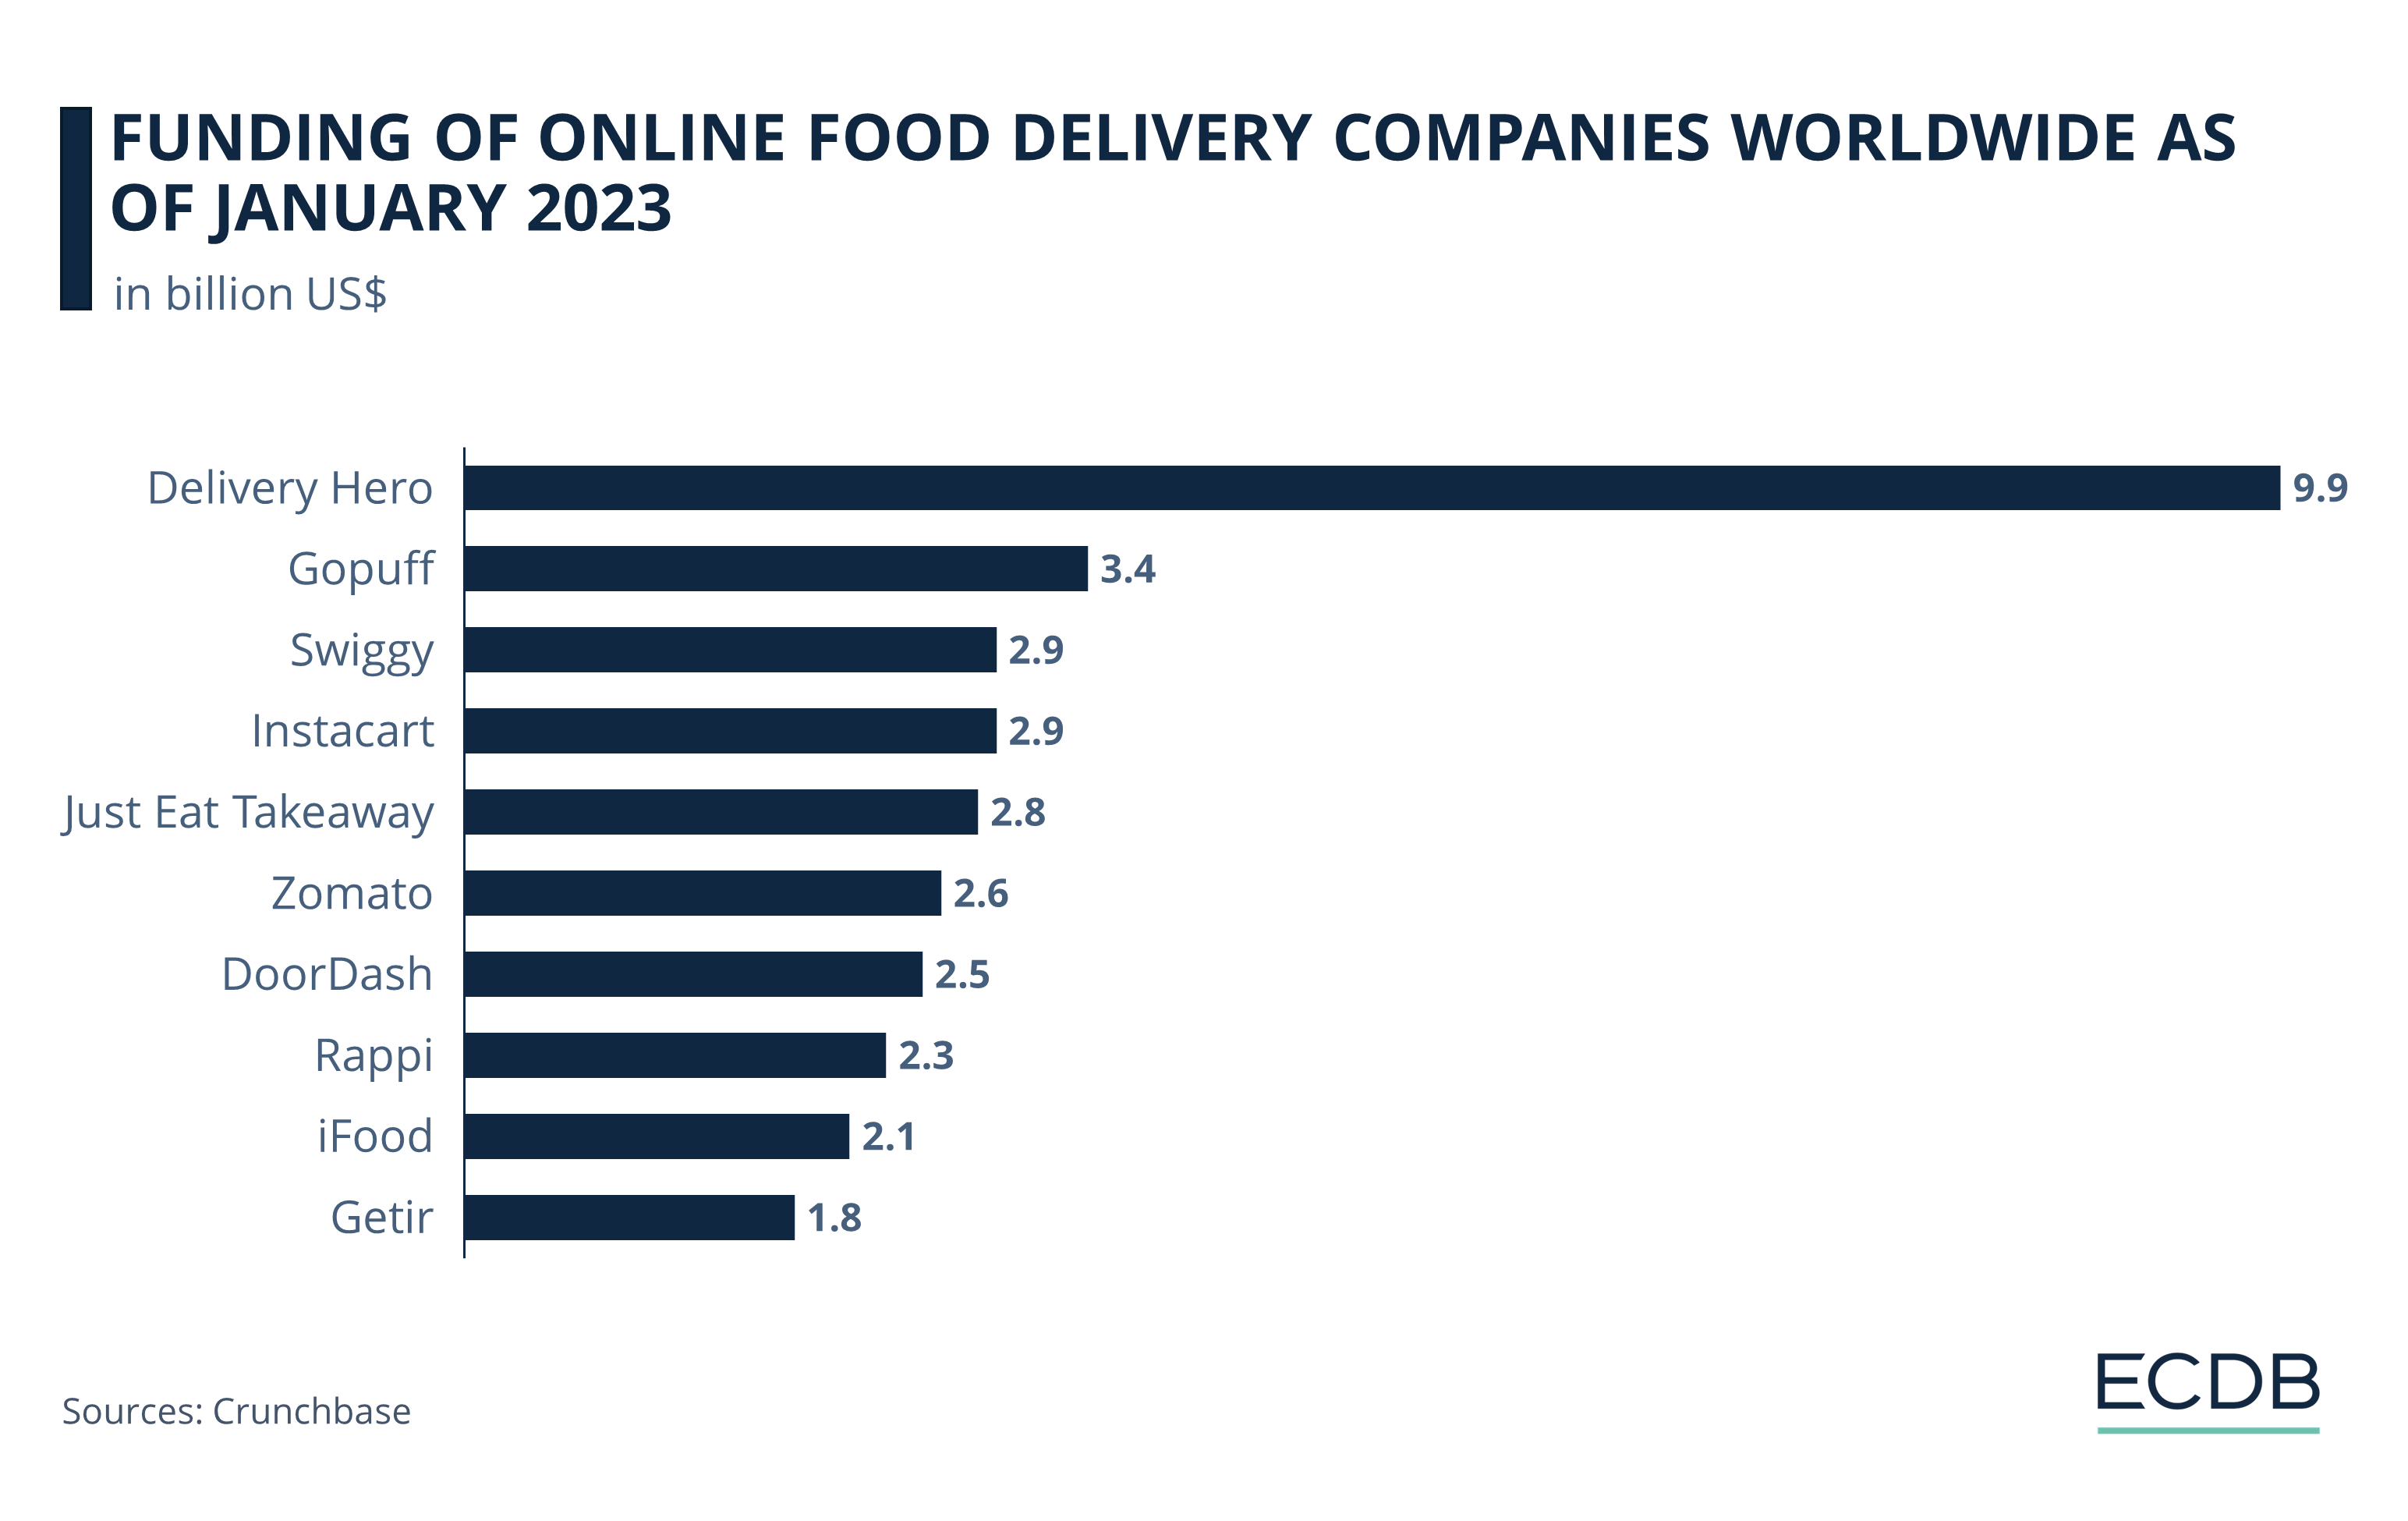 Funding of Online Food Delivery Companies Worldwide as of January 2023